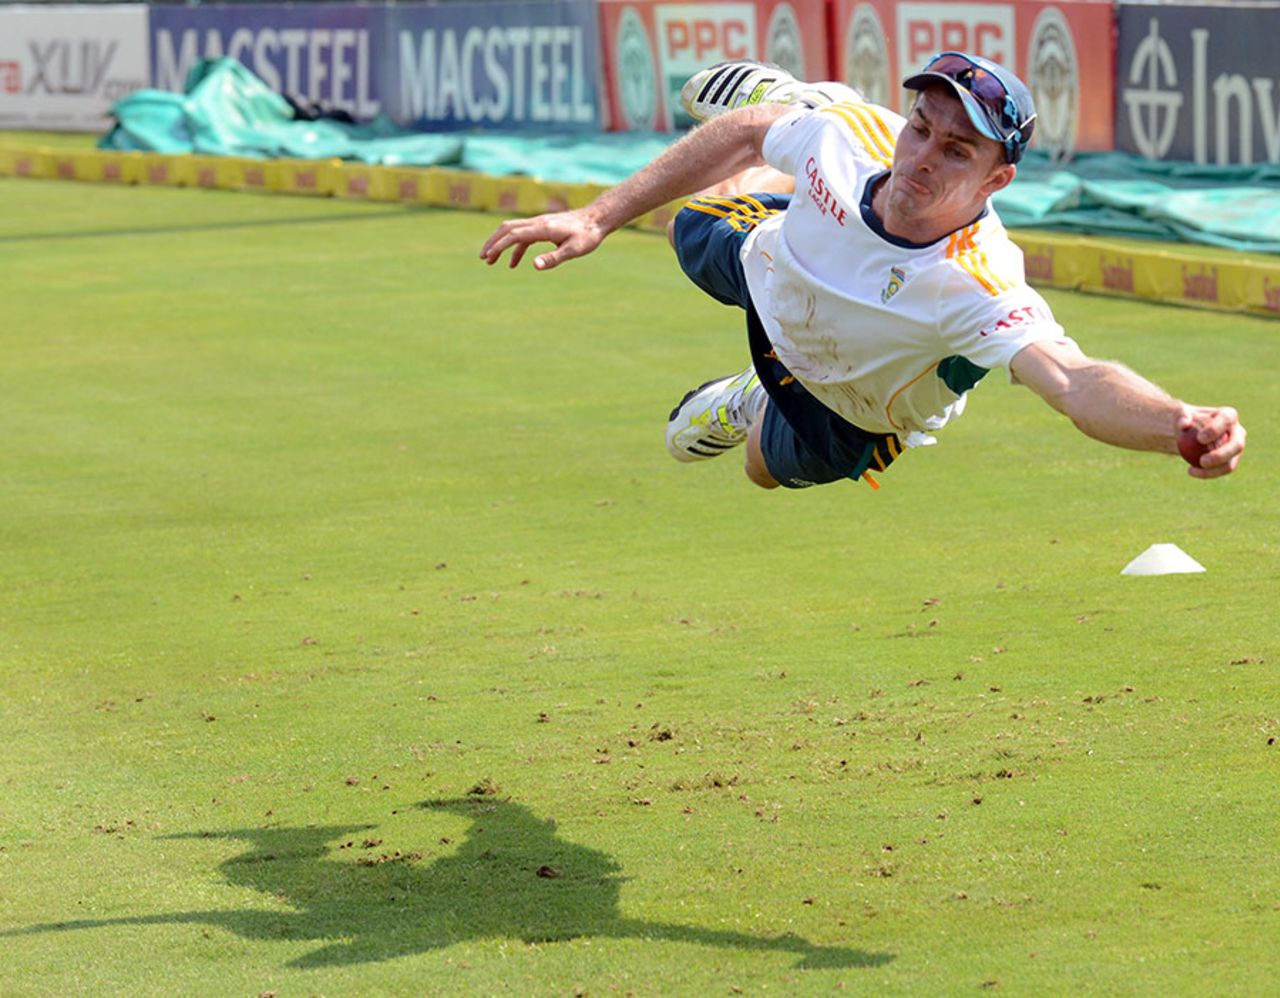 Ryan McLaren dives to take a catch during training, Centurion, February 10, 2014